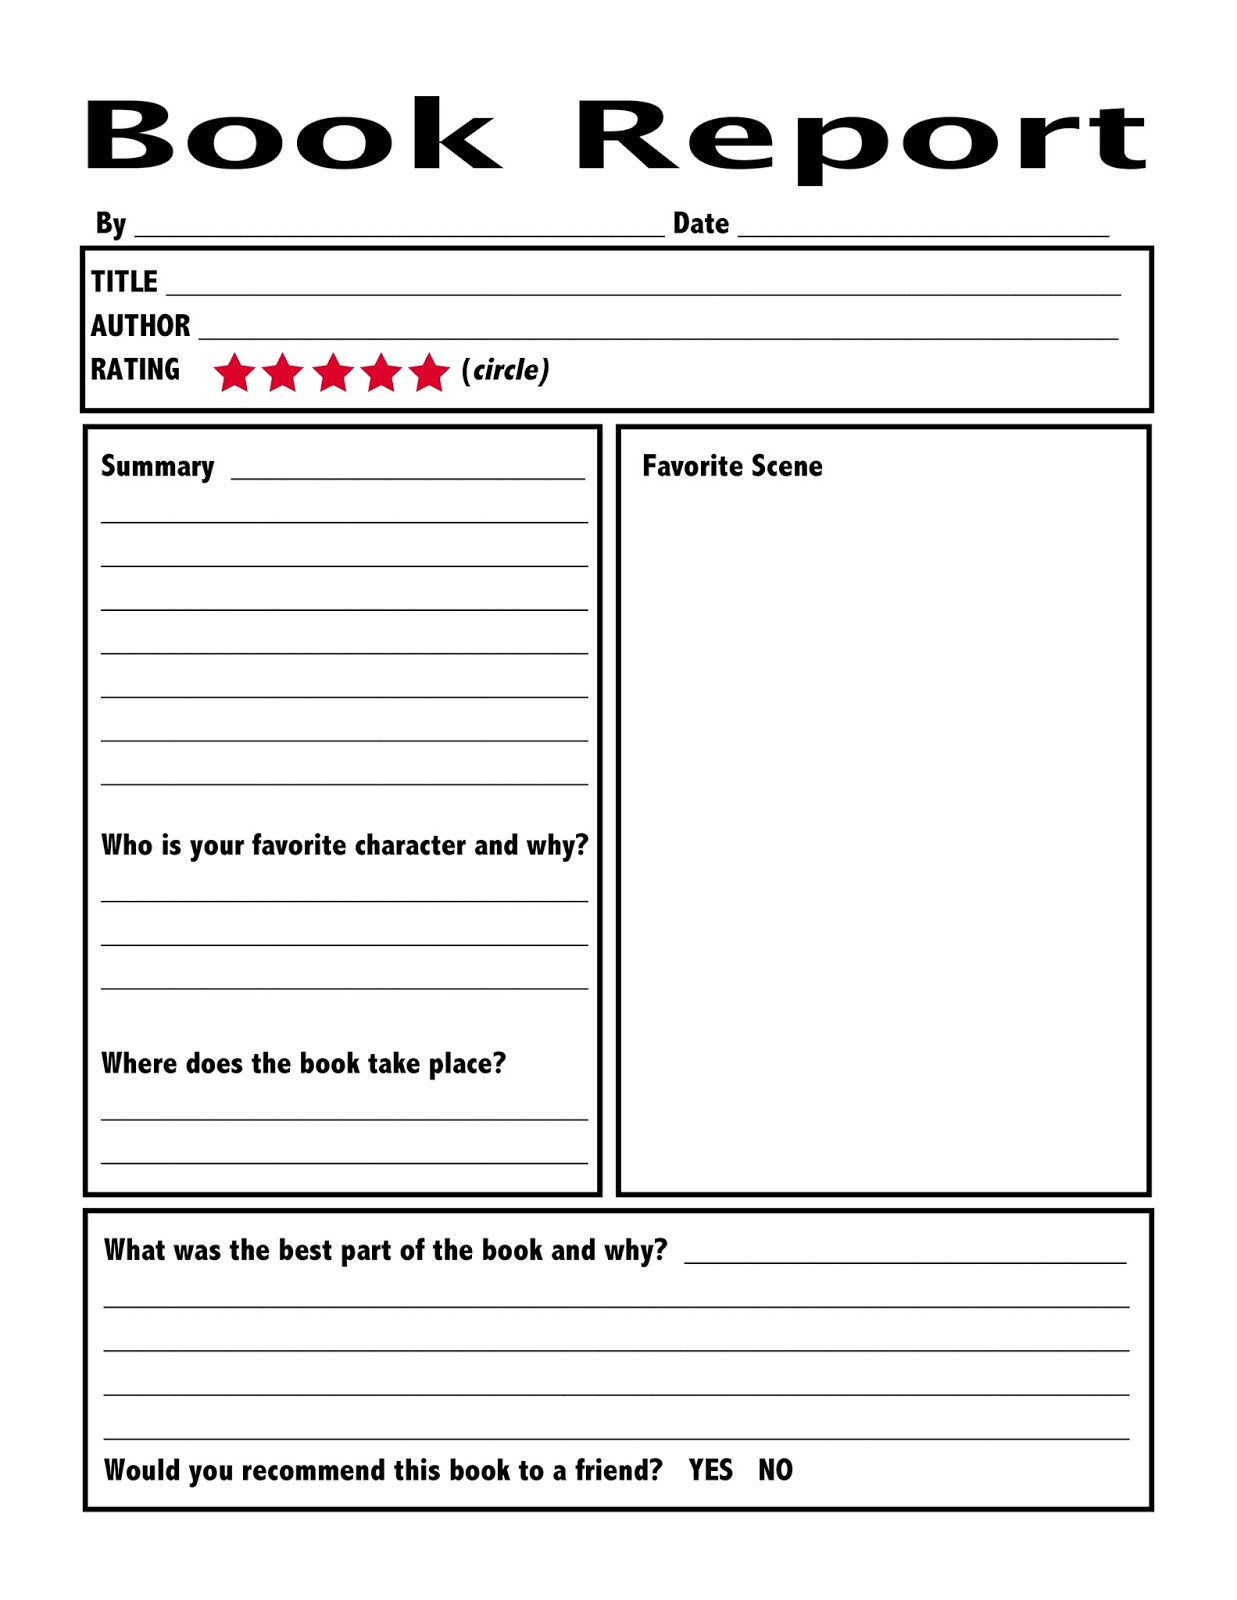 Book Report Writing Examples for Students | Examples